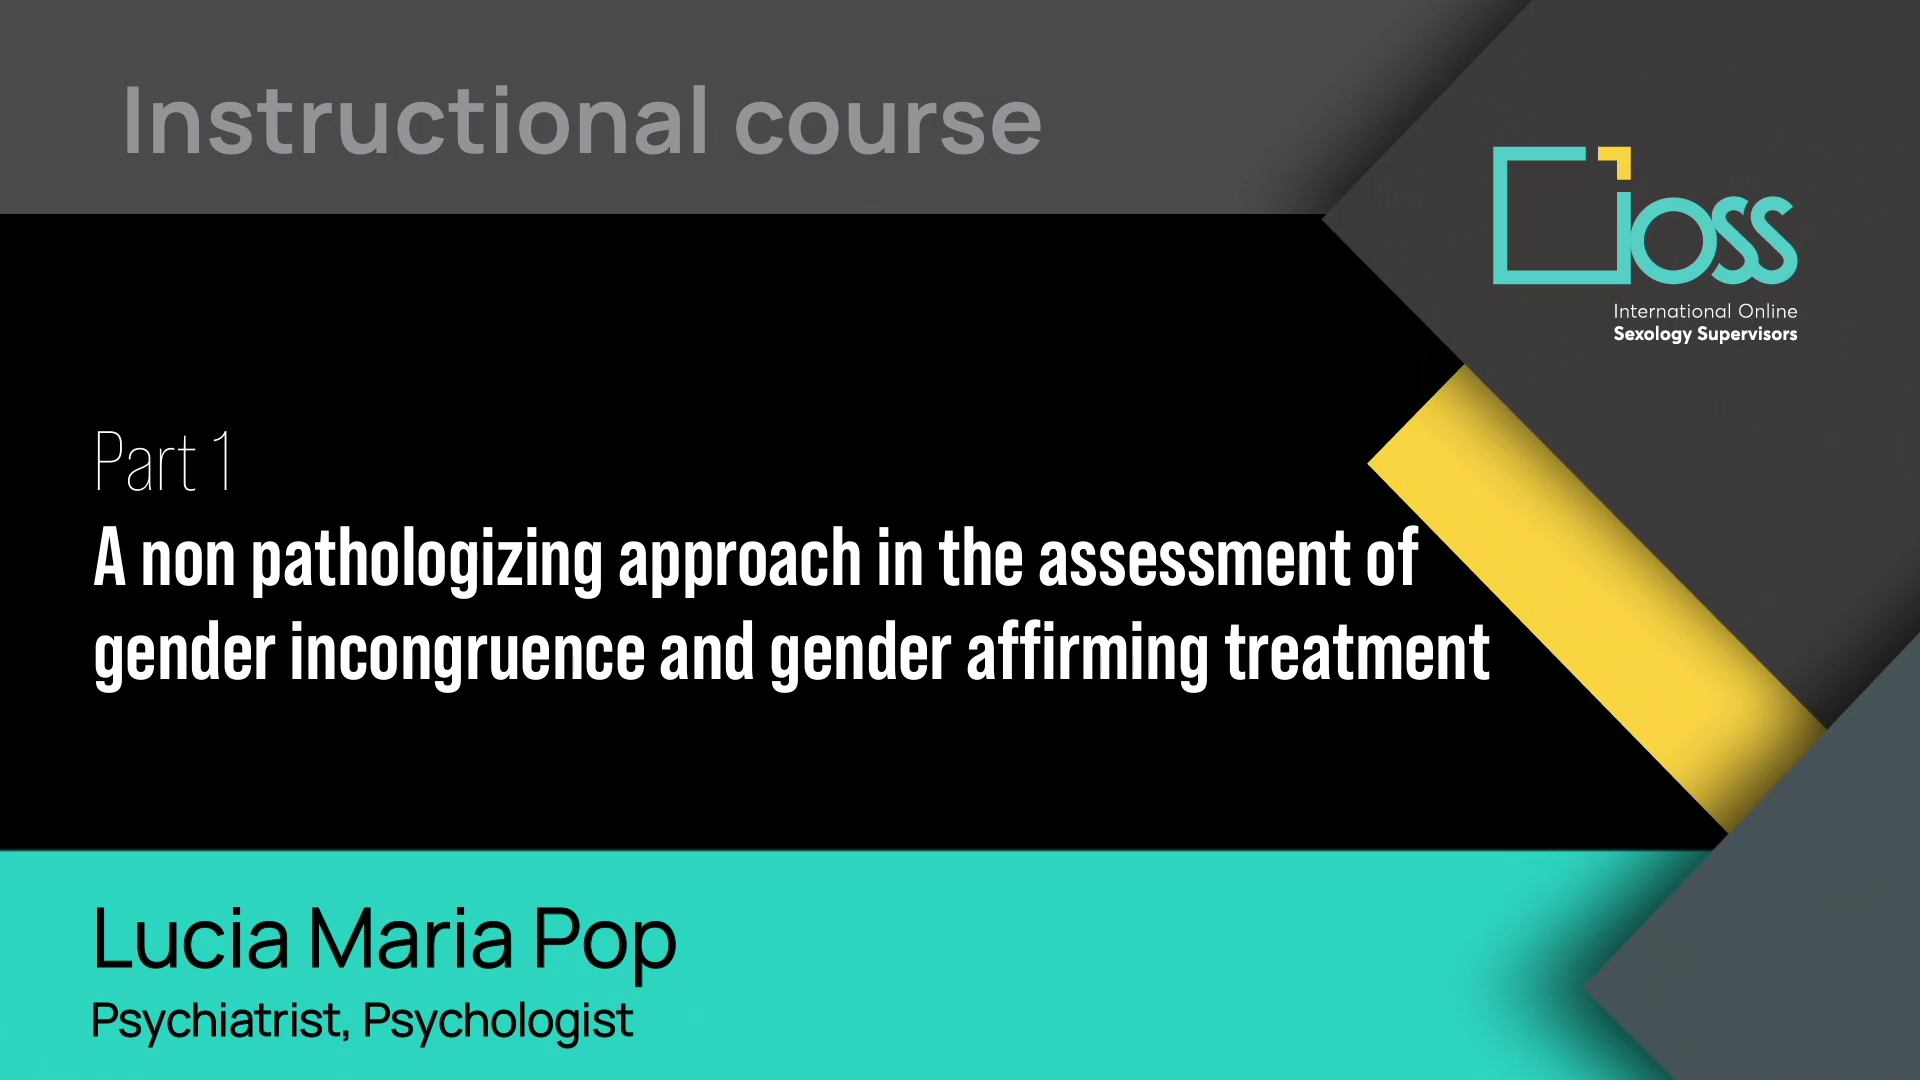 Part 1 A non pathologizing approach in the assessment of gender incongruence and gender affirming treatment (Part 1 & 2)